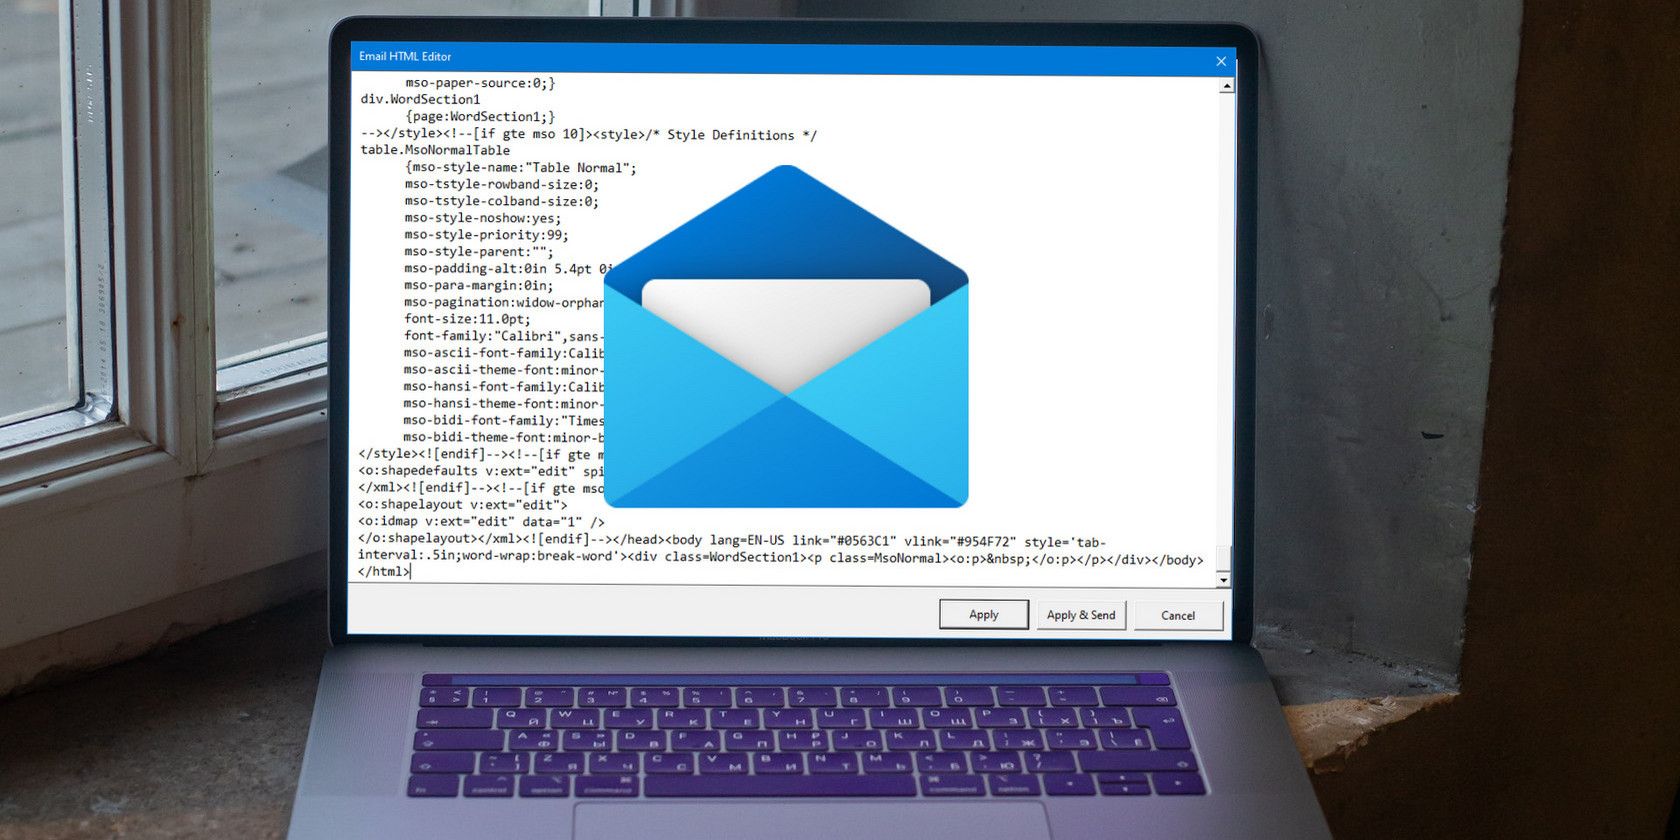 Windows Mail app displaying email in HTML format on a laptop